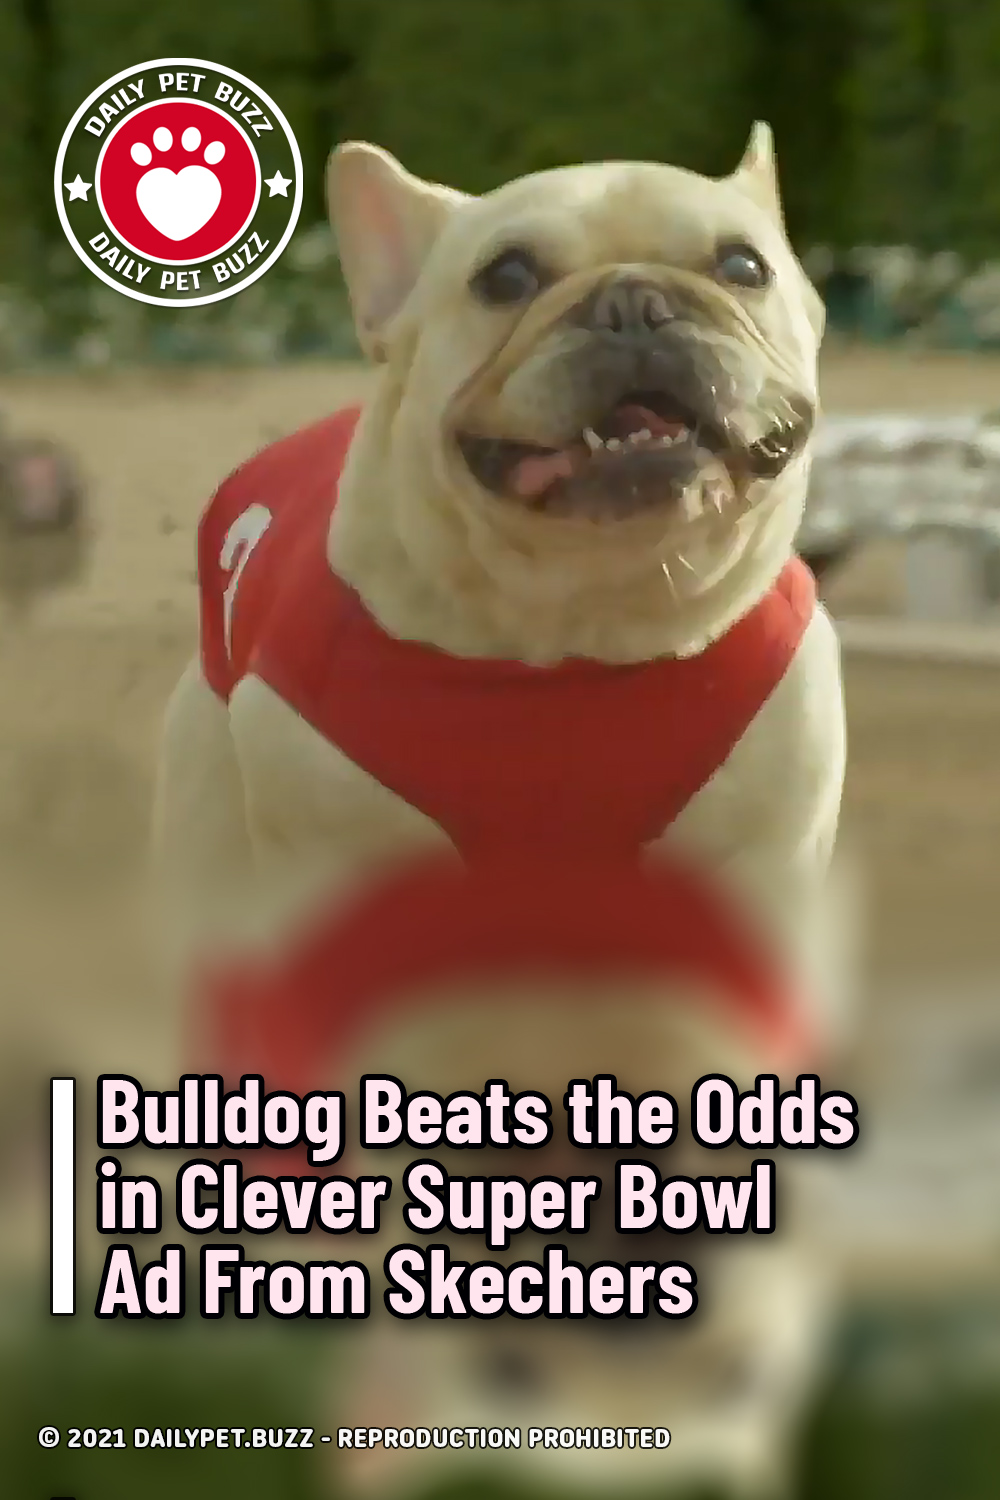 Bulldog Beats the Odds in Clever Super Bowl Ad From Skechers